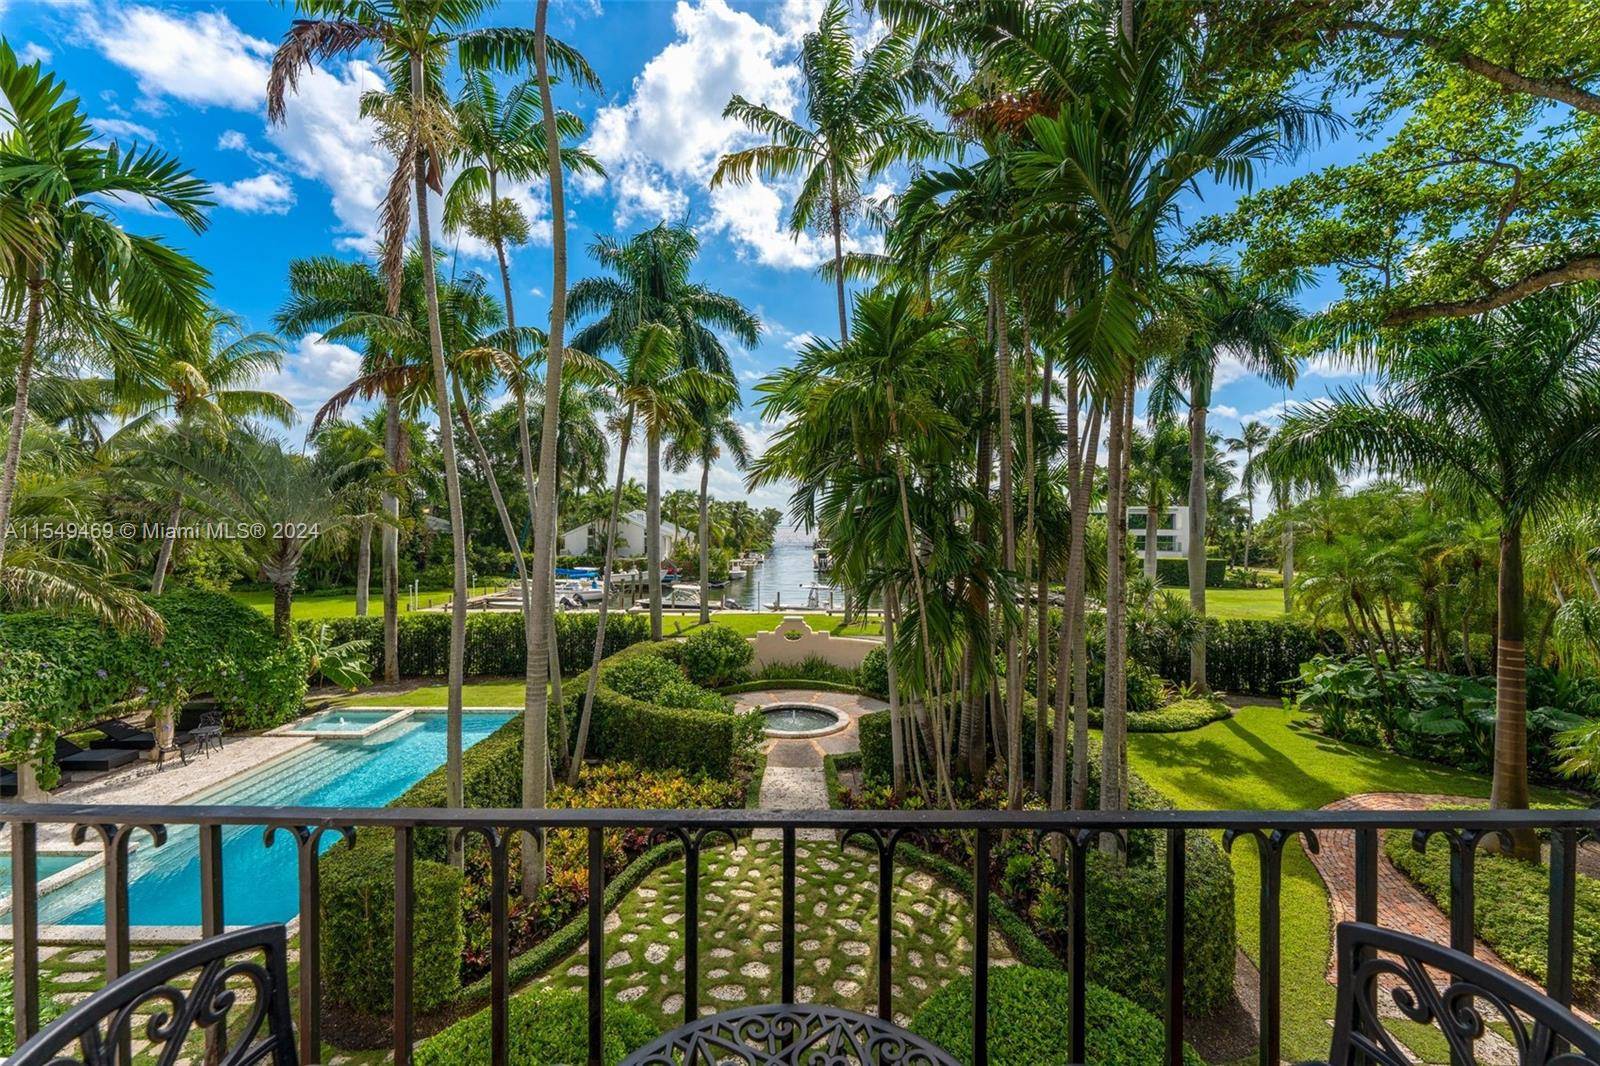 A Home by the Sea. Experience the magic of Mediterranean Revival architecture in one of Coconut Grove's most exclusive enclaves.